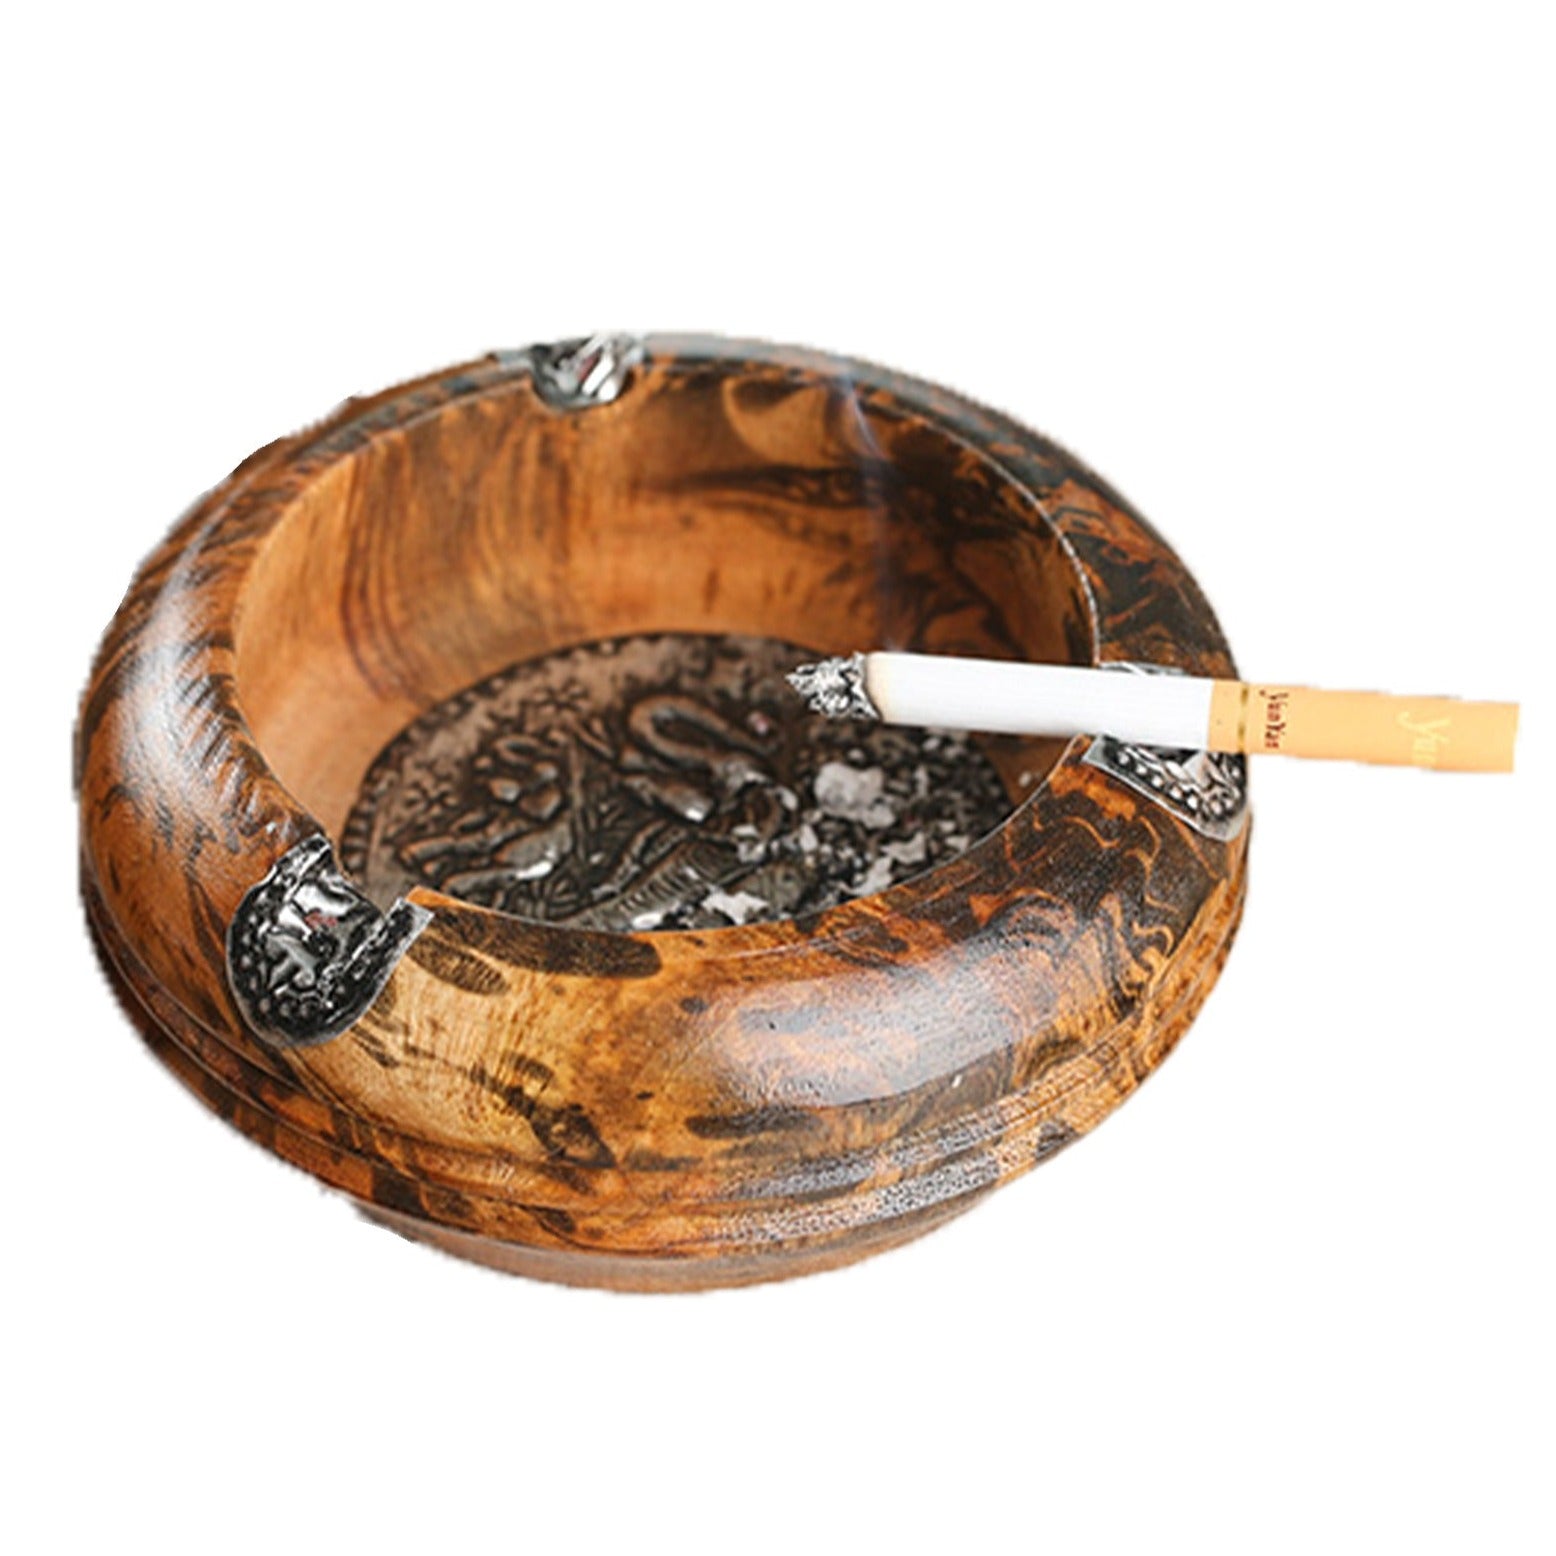 Glass Ashtray, 1 Round Glass Ash Tray, Ash Trays for Smoking for Home,  Ashtray for Cigarette Stylish, Ashtray for Home, Car Ashtray 12 cm